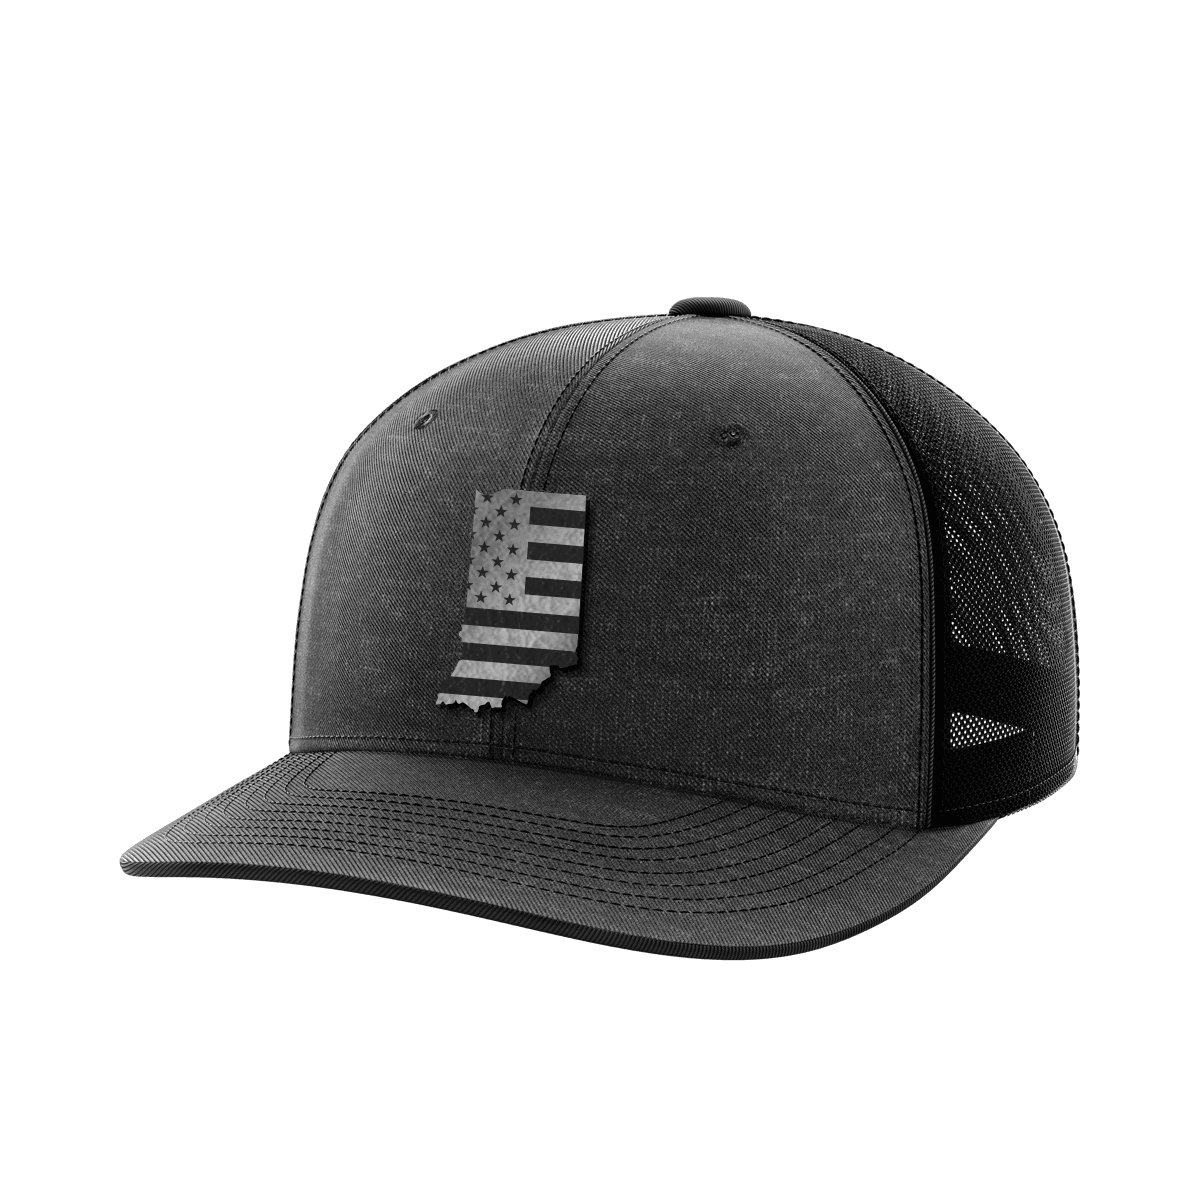 Indiana United Collection (black leather) - Greater Half